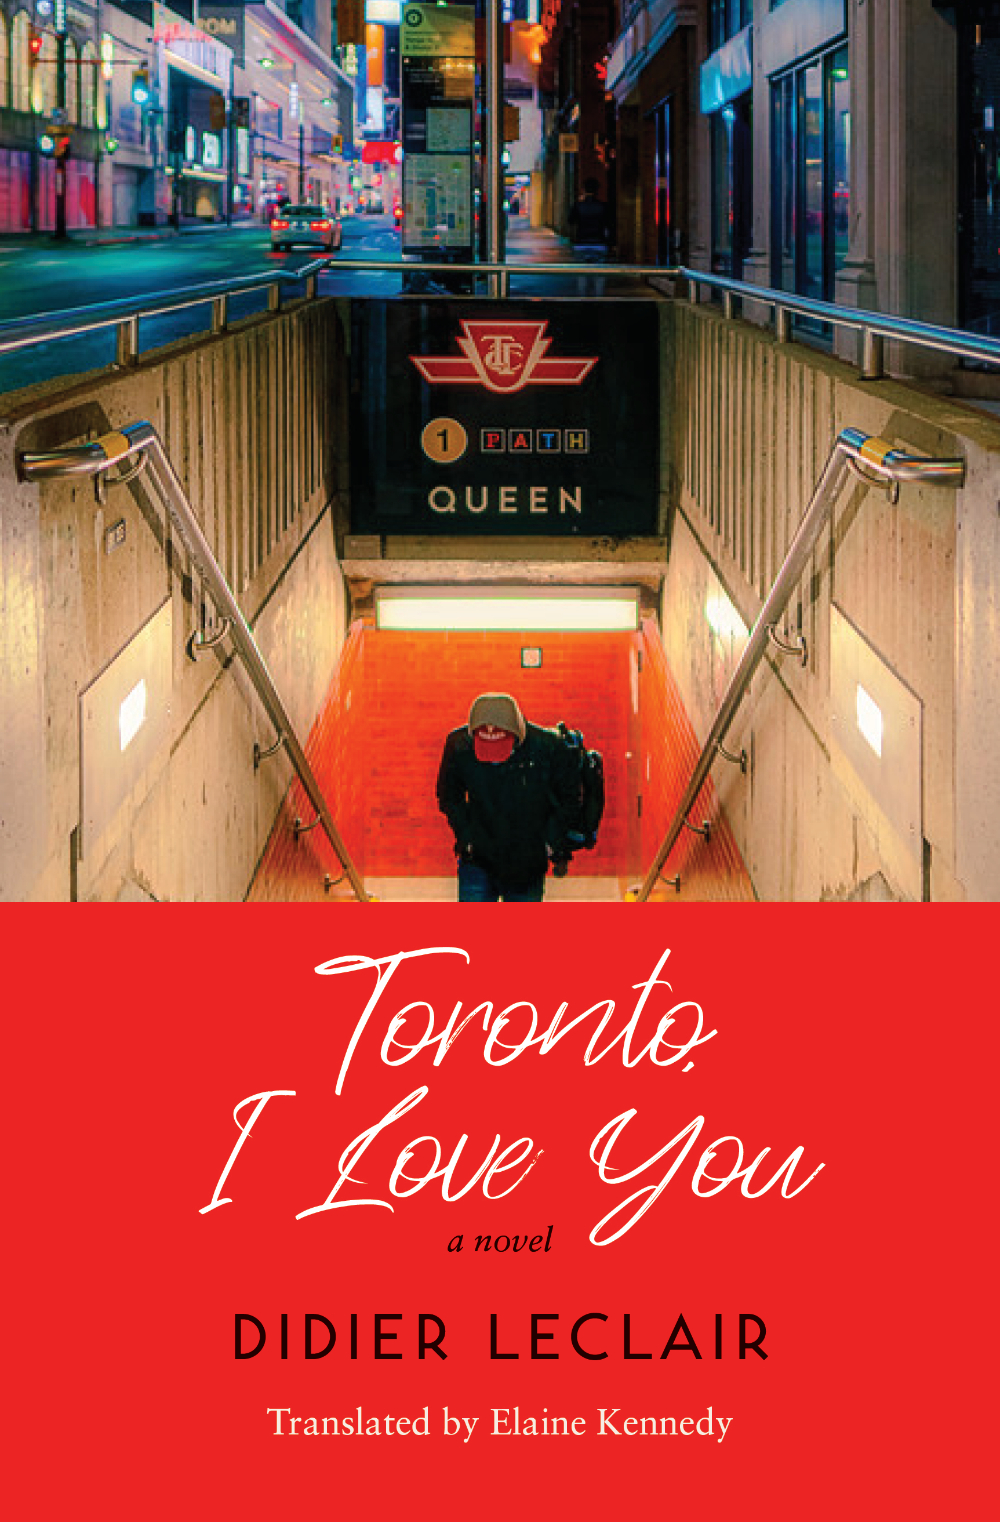 The cover of Toronto, I Love You by Didier LeClair.